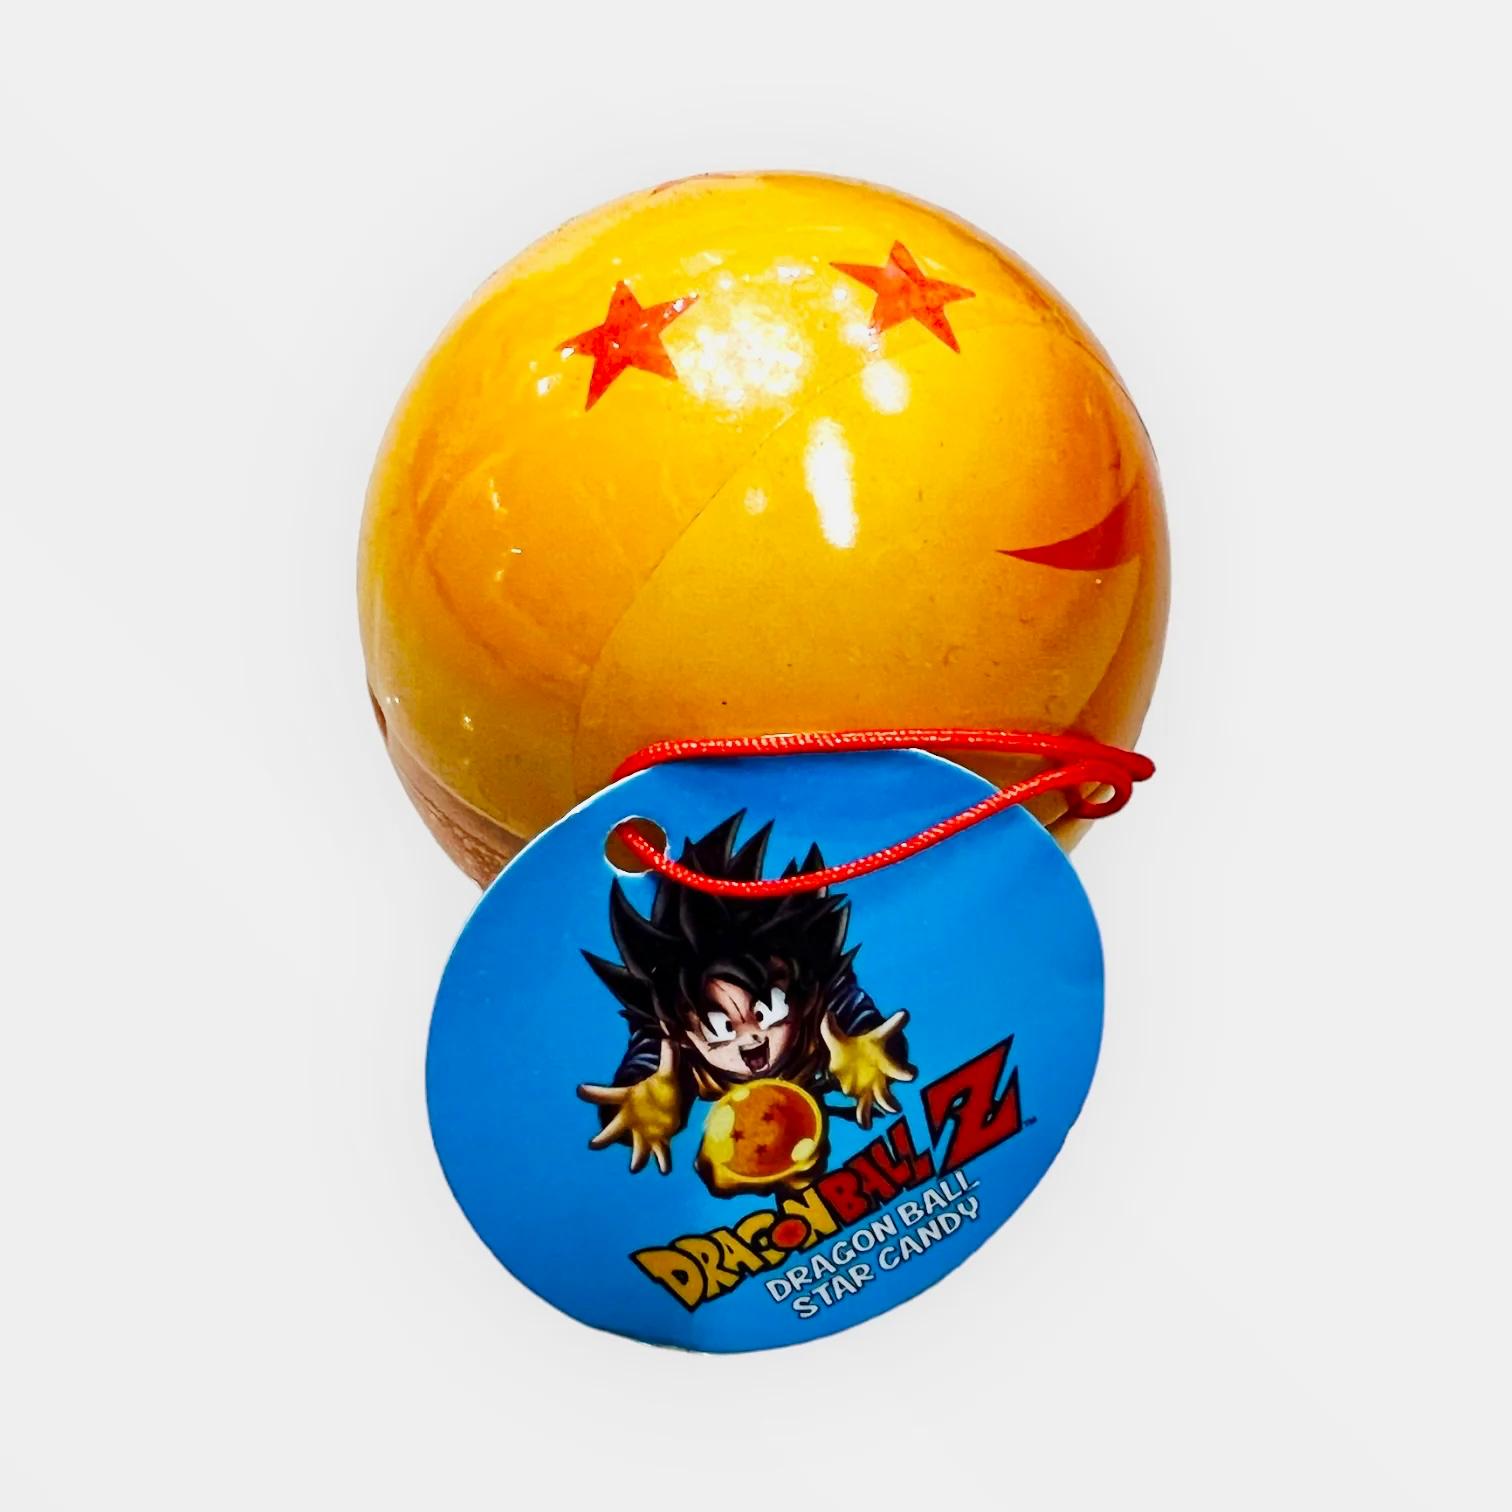 Dragon Ball Z Dragon Balls Tin 30g with Sweet Red Star-Shaped Candy